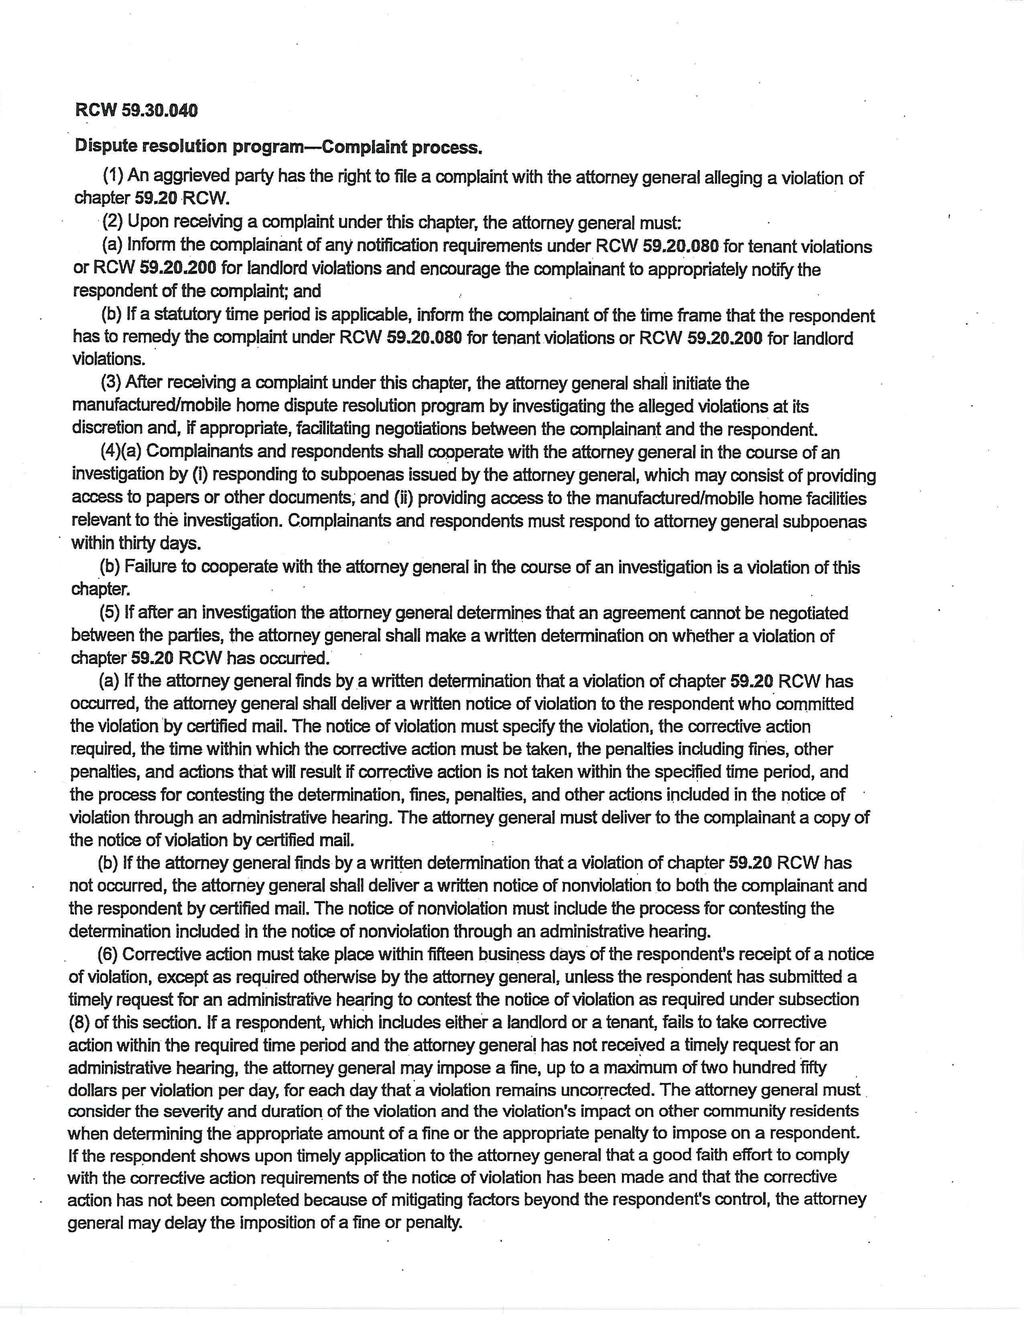 RCW 59.30.040 Dispute resolution program Complaint process. (1) An aggrieved party has the right to file a complaint with the attorney general alleging a violation of chapter 59.20 RCW.